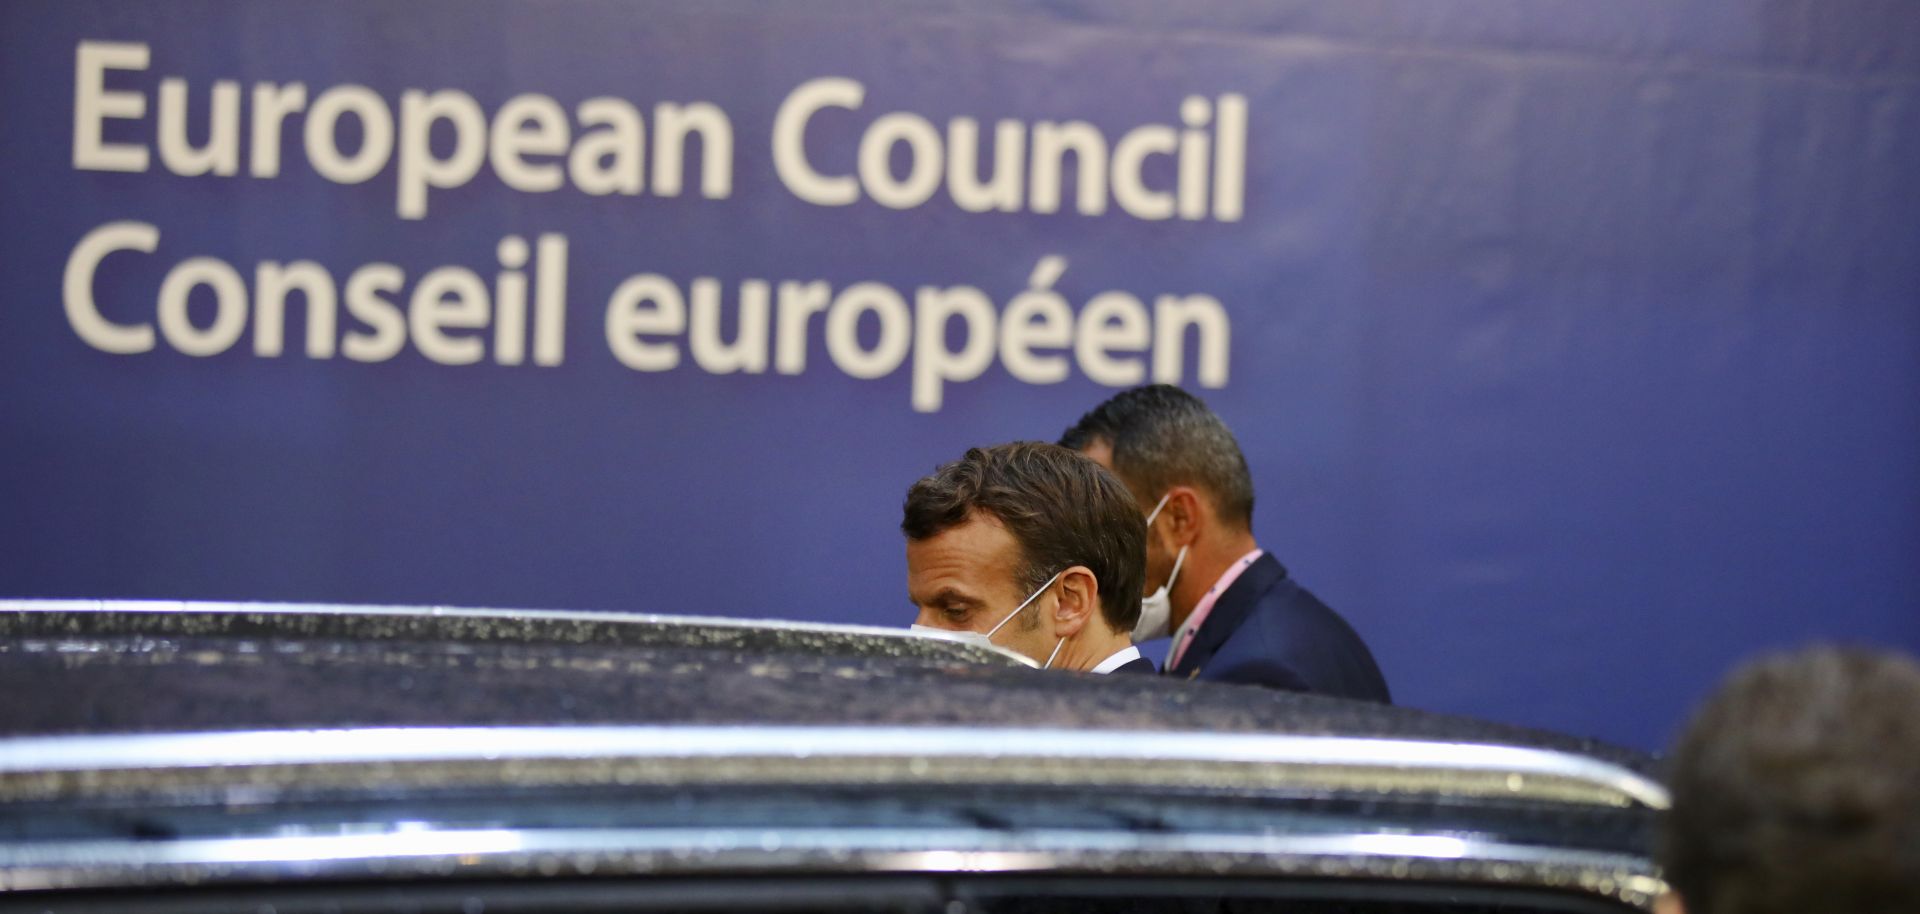 French President Emmanuel Macron leaves the European Council building in Brussels, Belgium, on July 20, 2020. Leaders from the 27 EU member states met on July 19 to discuss the bloc’s budget and new COVID-19 recovery package. 